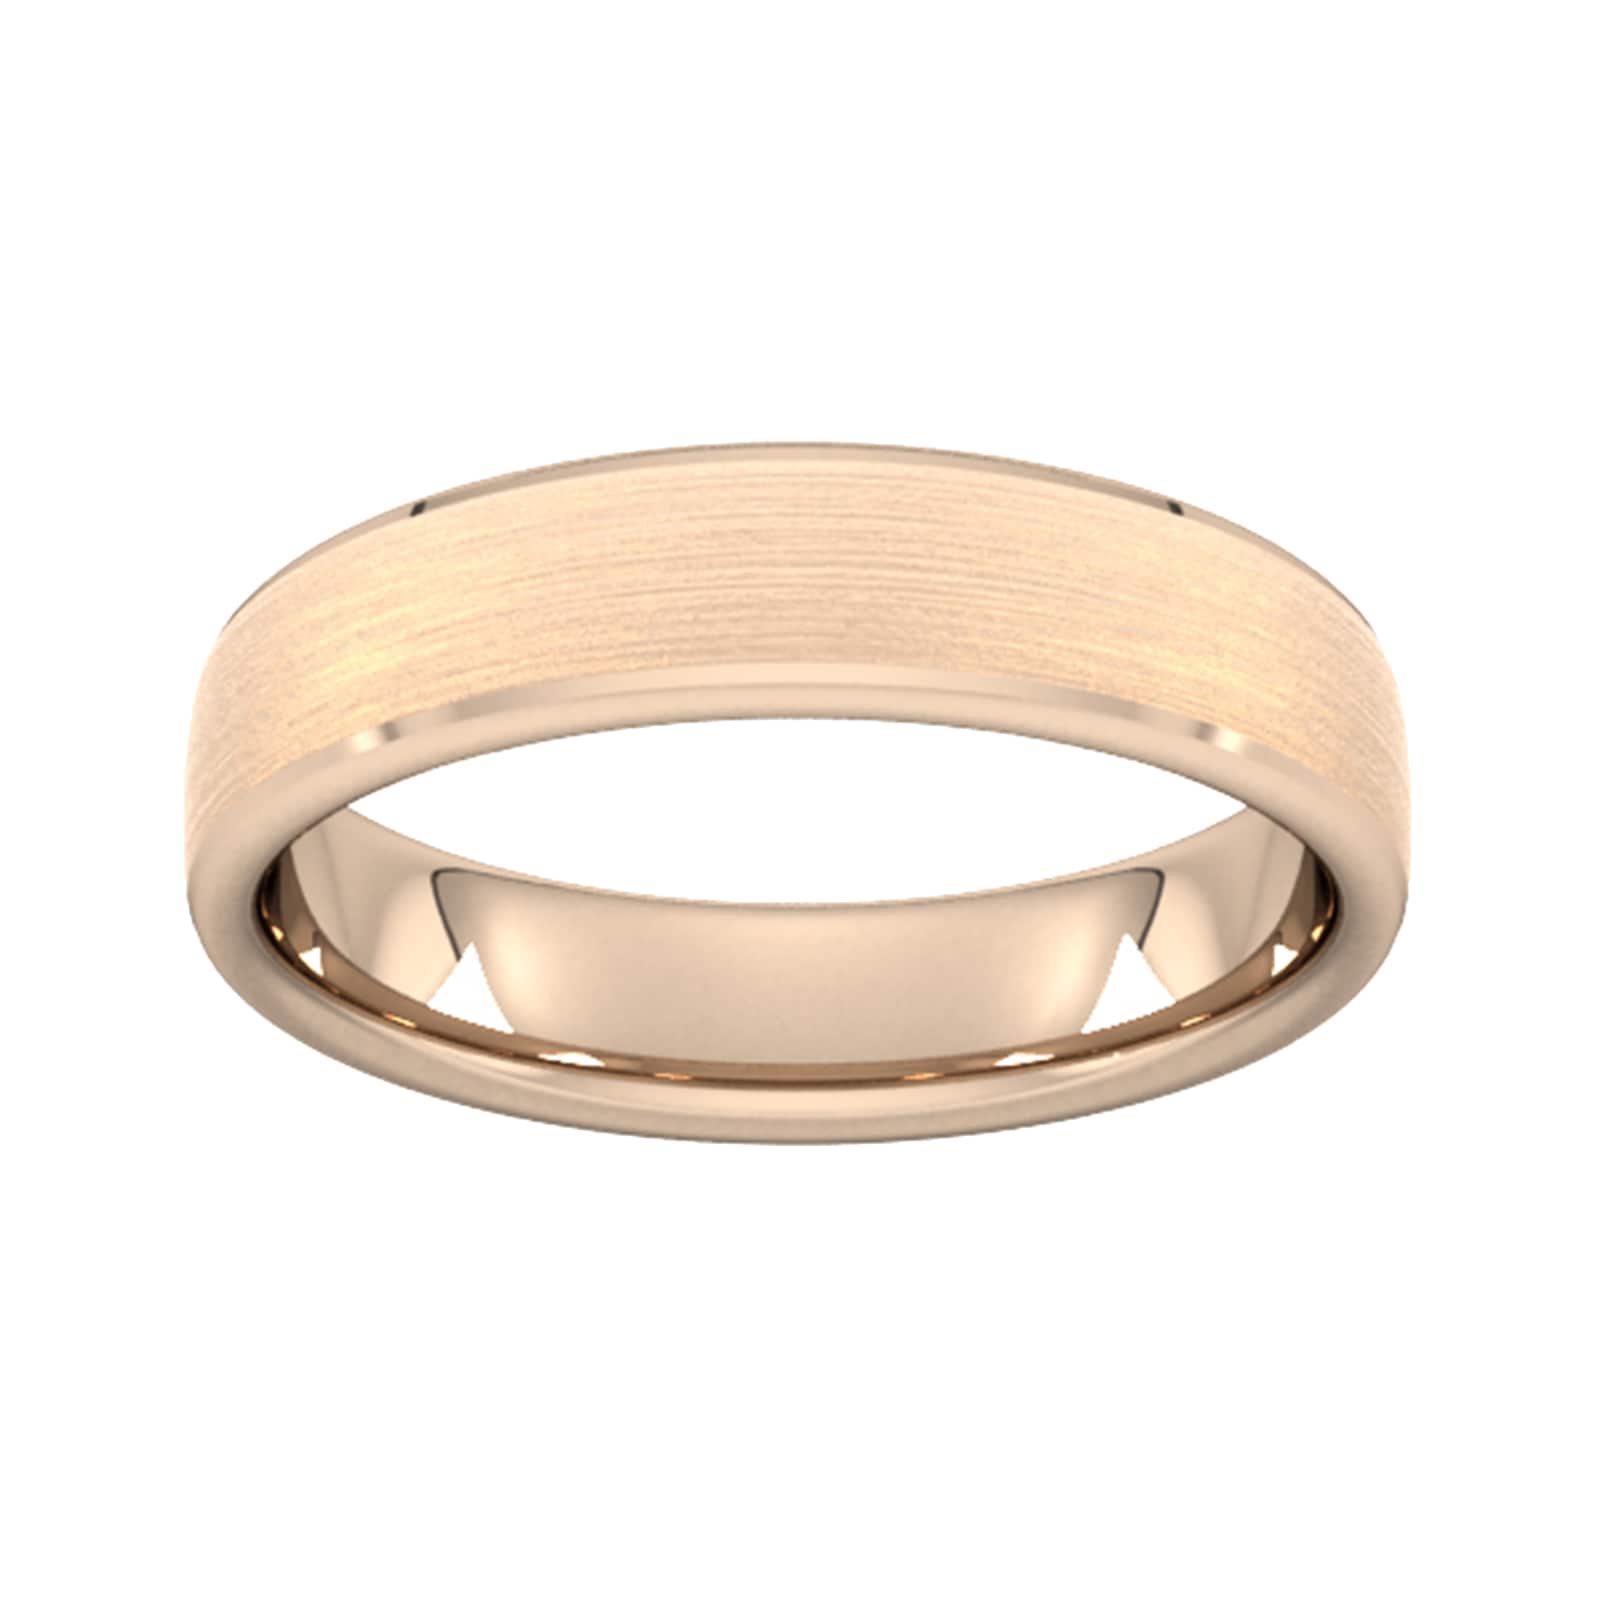 5mm D Shape Heavy Polished Chamfered Edges With Matt Centre Wedding Ring In 9 Carat Rose Gold - Ring Size Q